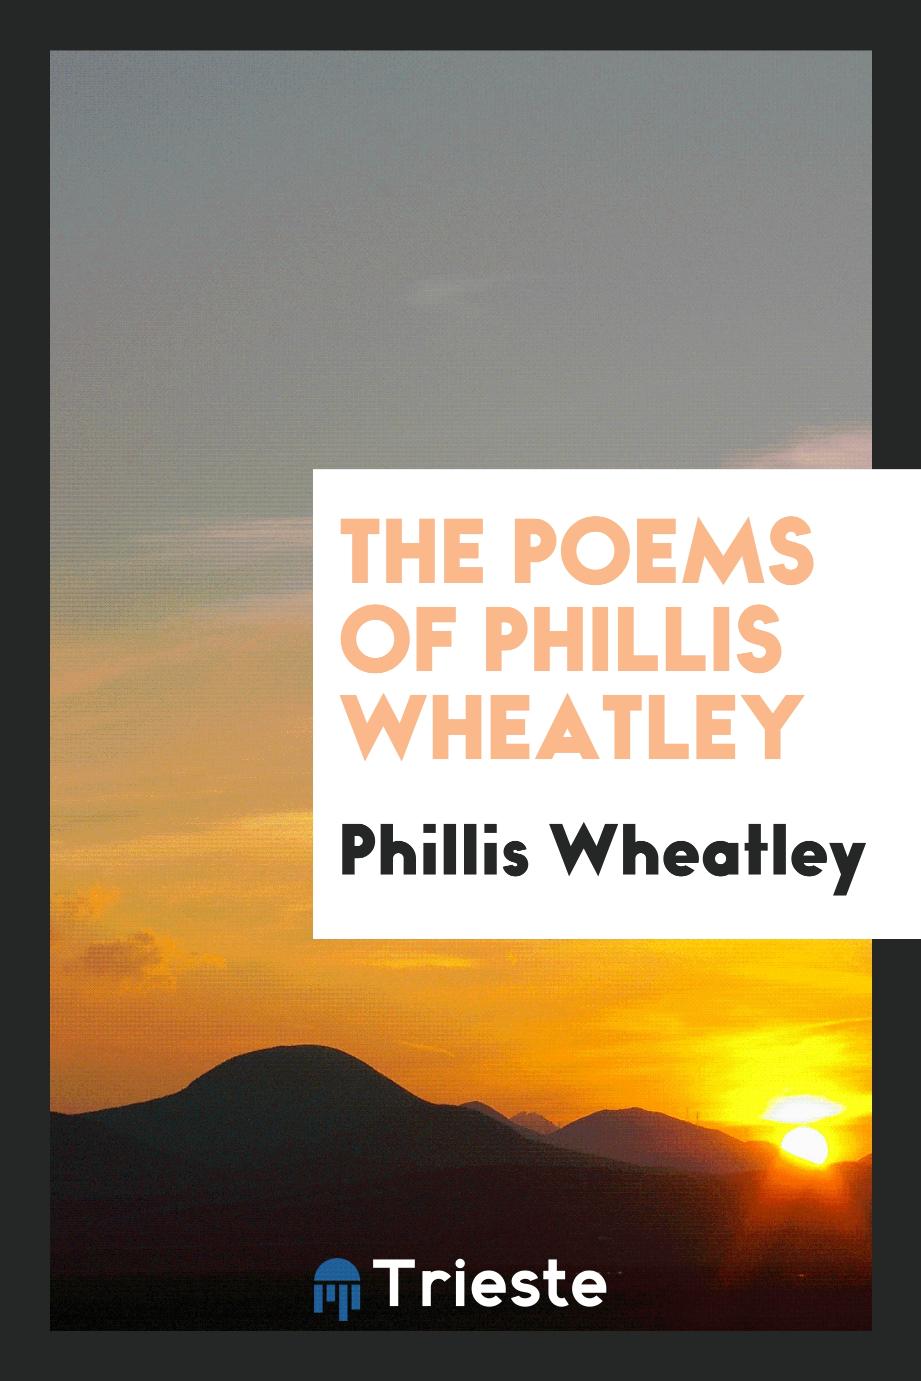 The poems of Phillis Wheatley